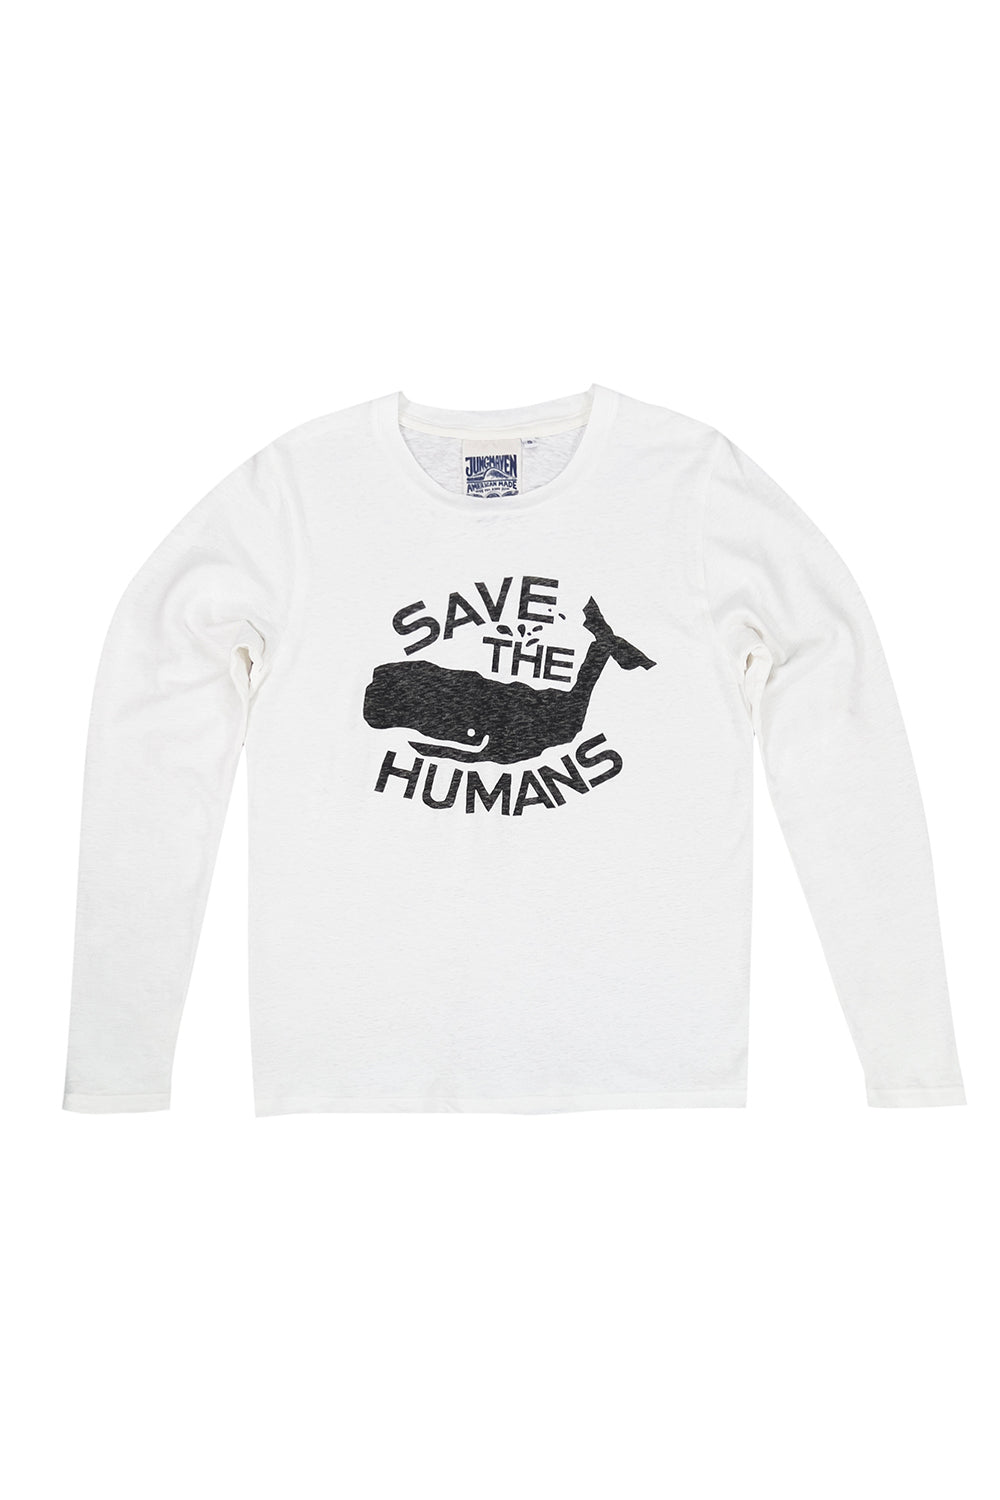 Save the Humans Encanto Long Sleeve Tee | Jungmaven Hemp Clothing & Accessories / Color: Washed White